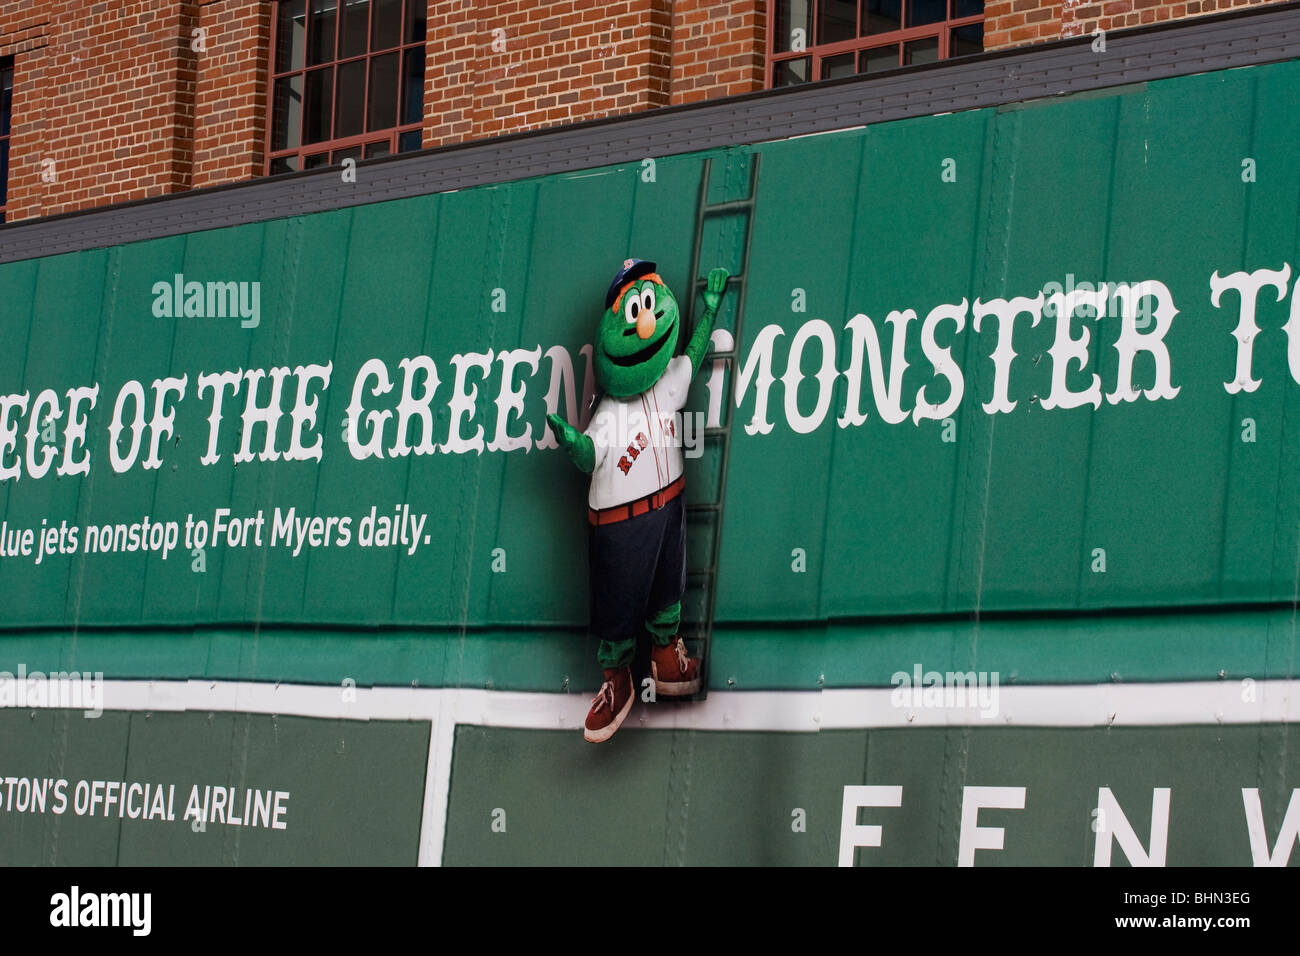 Wally the Red Sox Mascot on the side of the Equipment Truck at Fenway Park. Truck Day 2010. Stock Photo